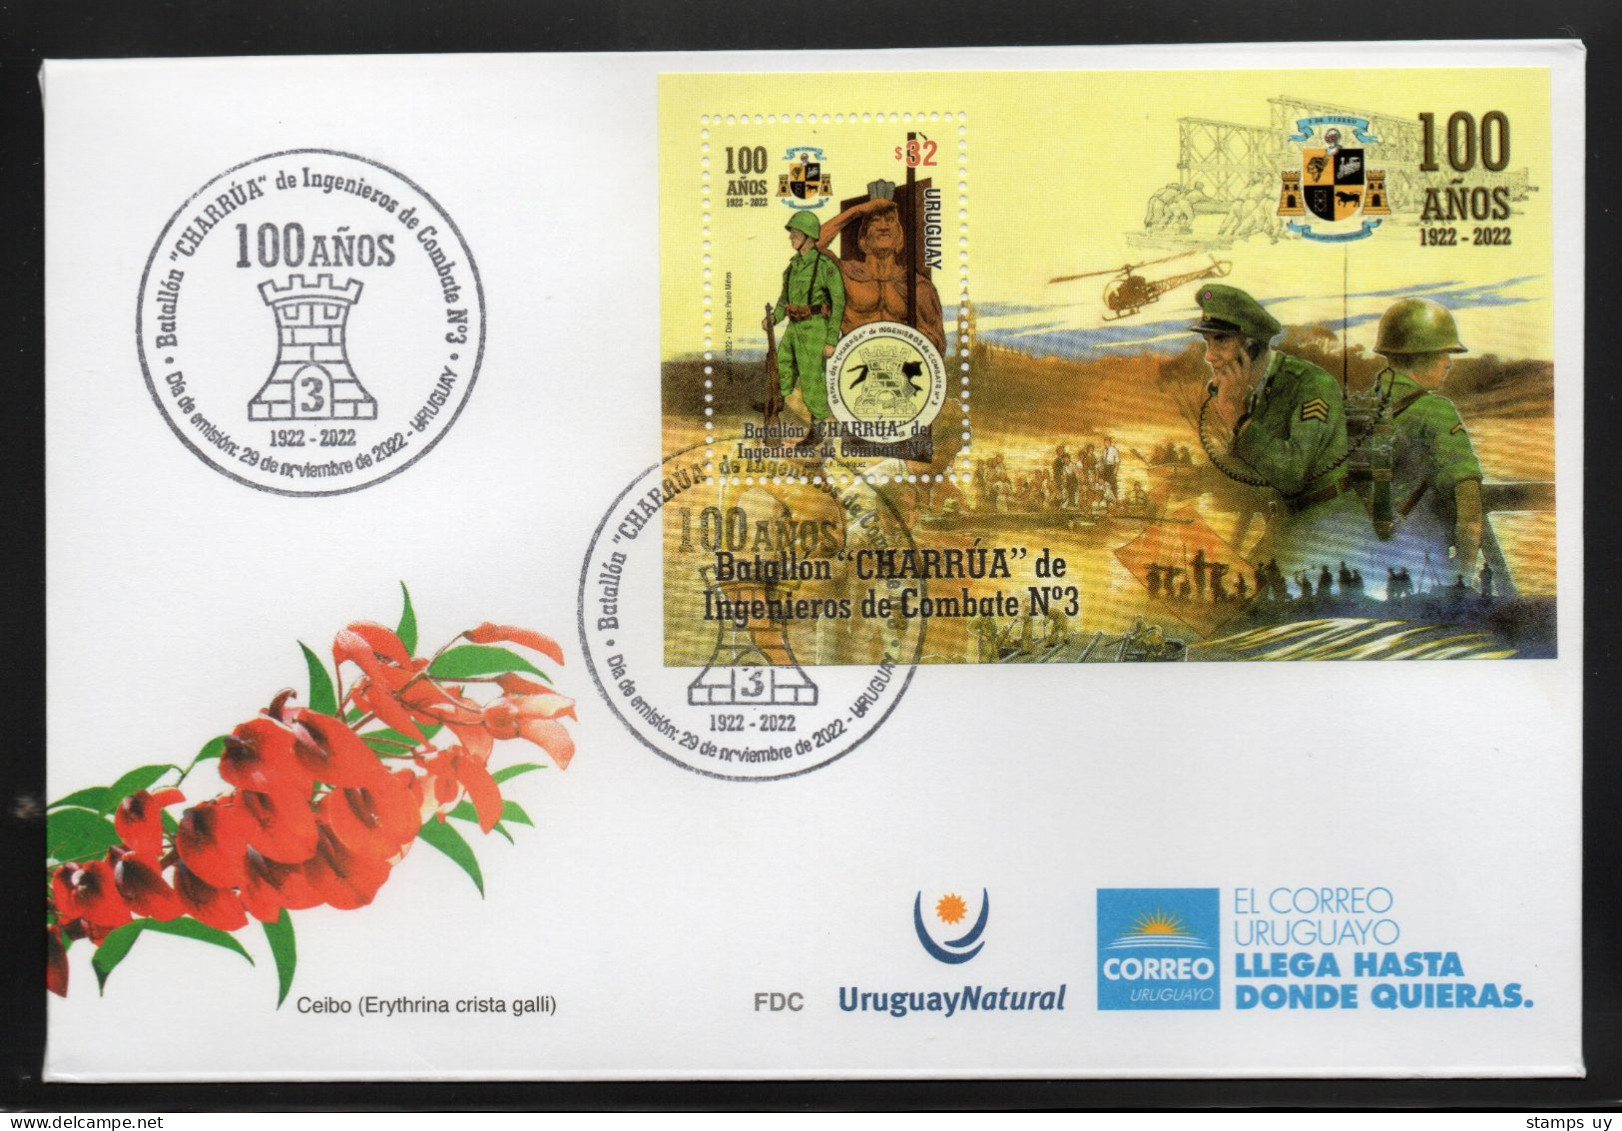 URUGUAY 2022 (Militar, Comunications, Engineers, Helicopters, Bell 47G, Trains, Radio, Indigenous, Sculptures) - 1 FDC - Koeien